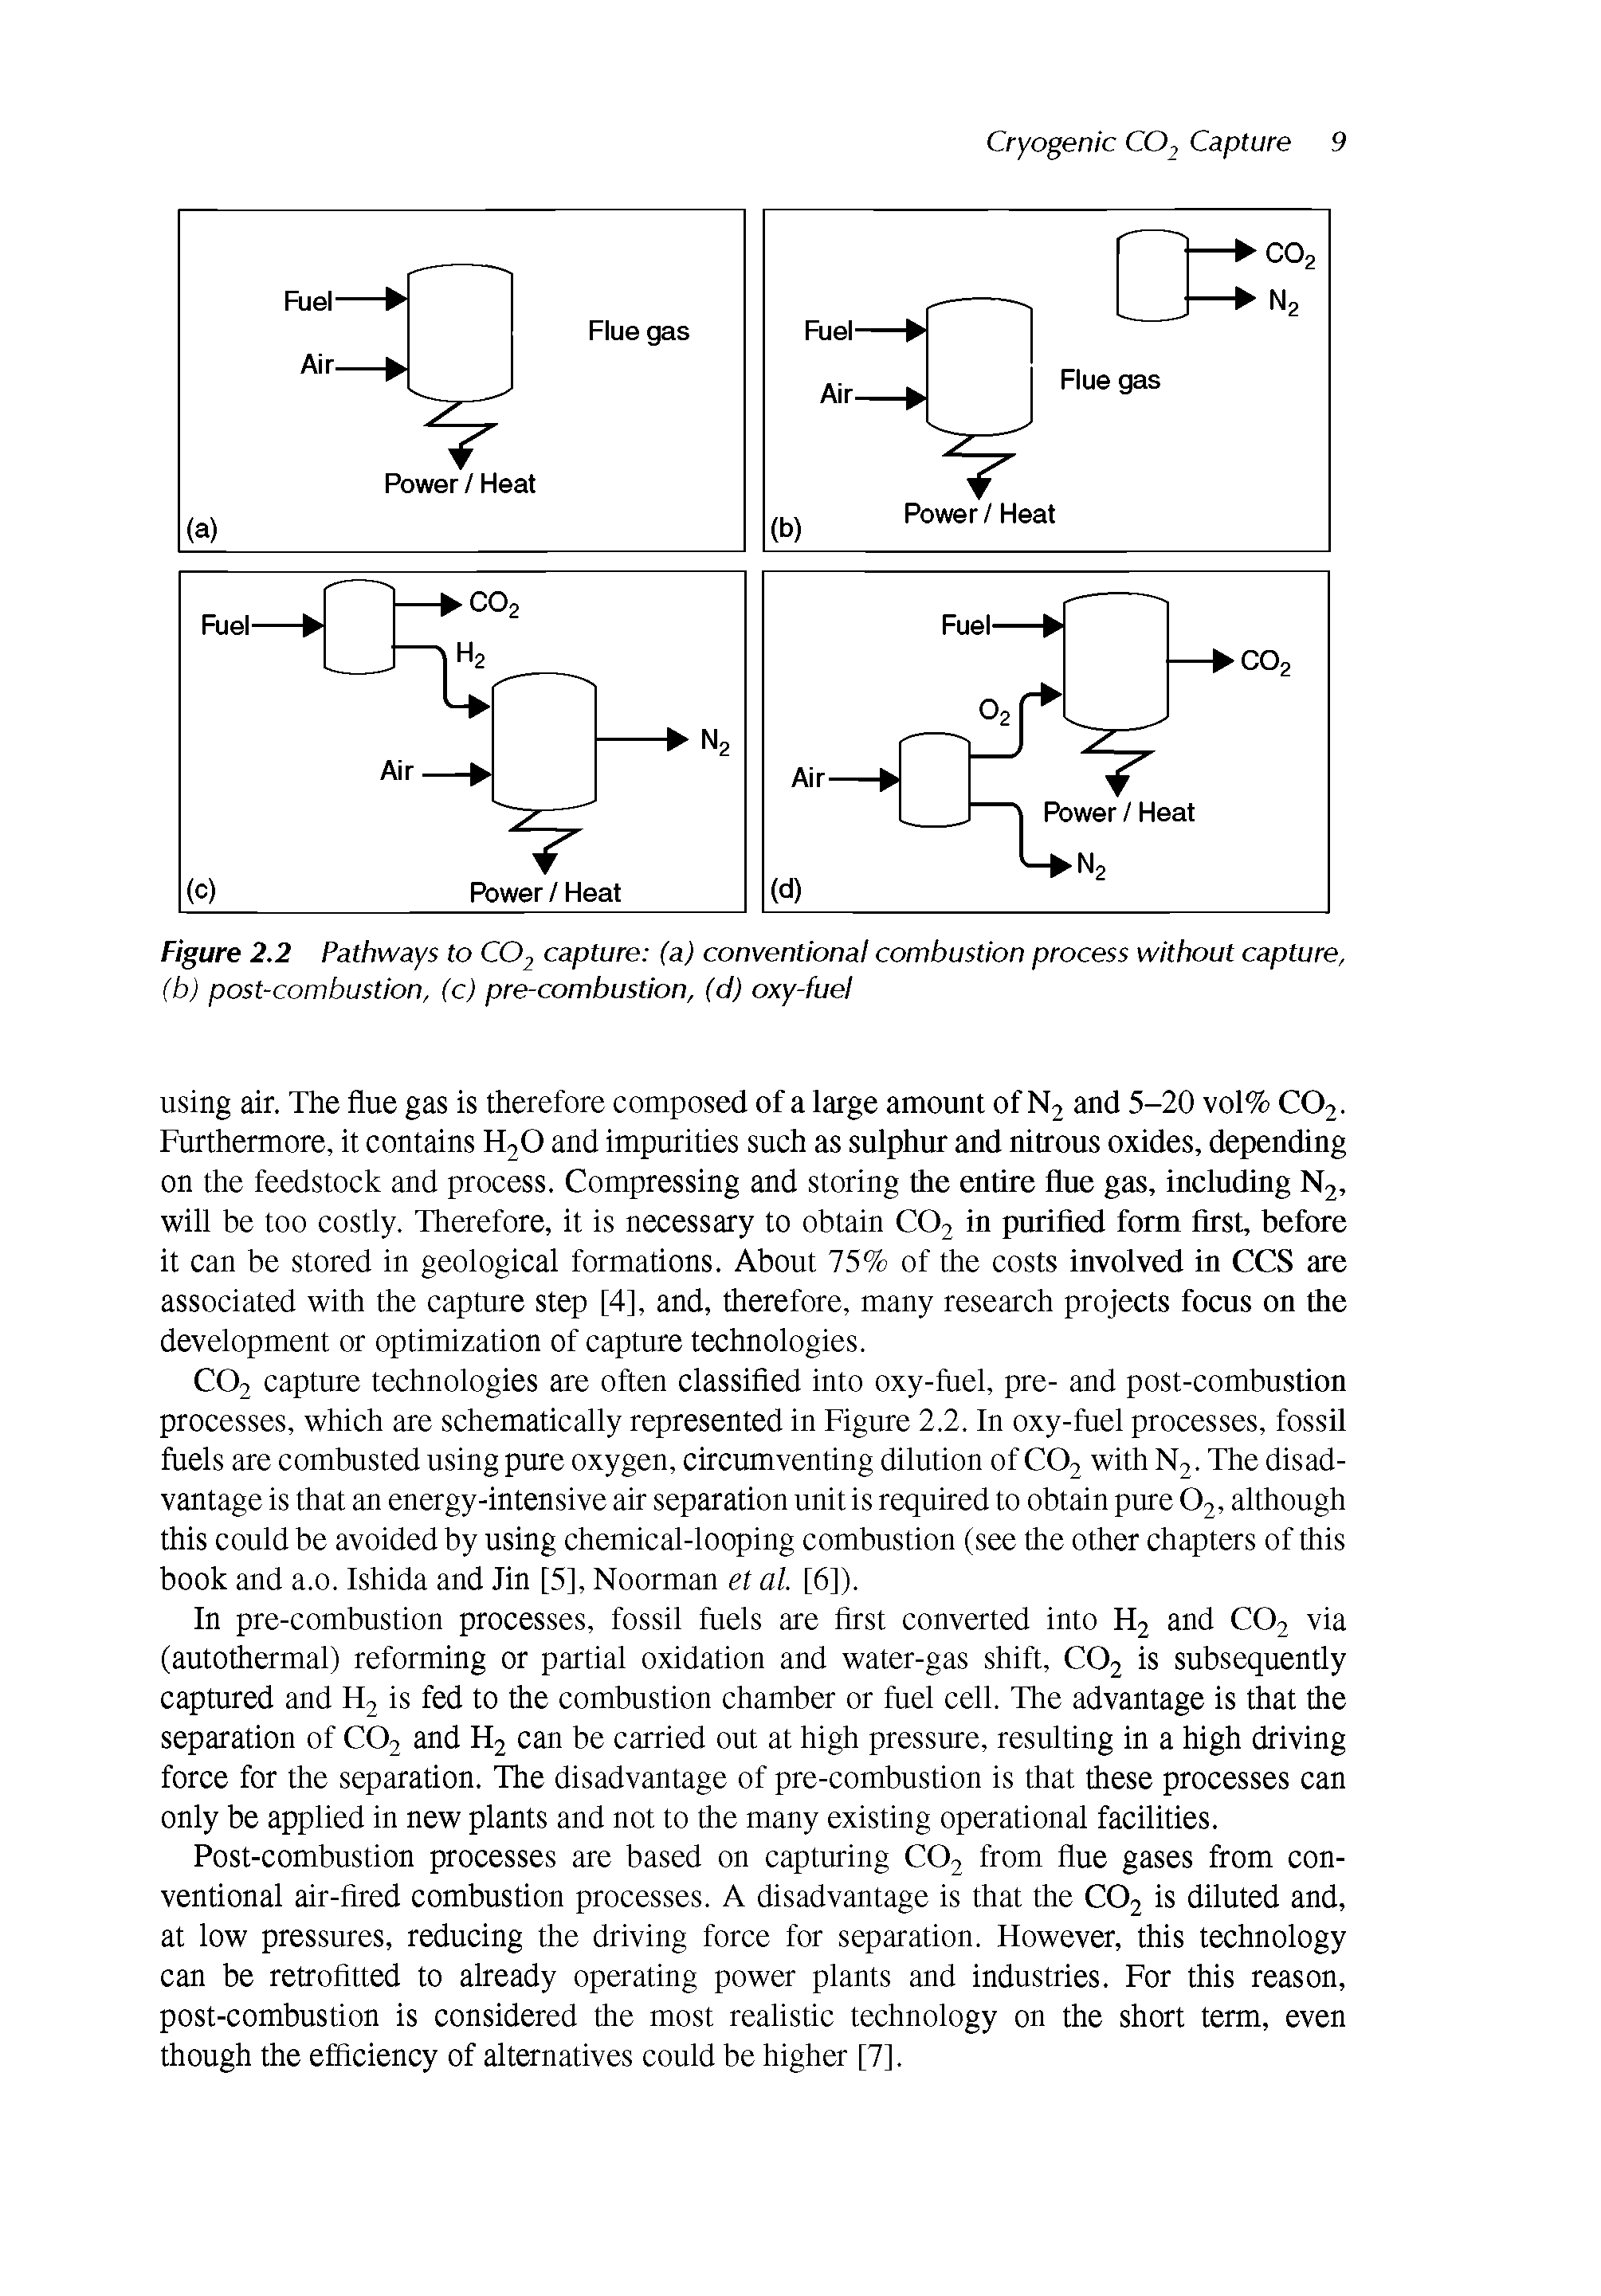 Figure 2.2 Pathways to CO2 capture (a) conventional combustion process without capture, (b) post-combustion, (c) pre-combustion, (d) oxy-fuel...